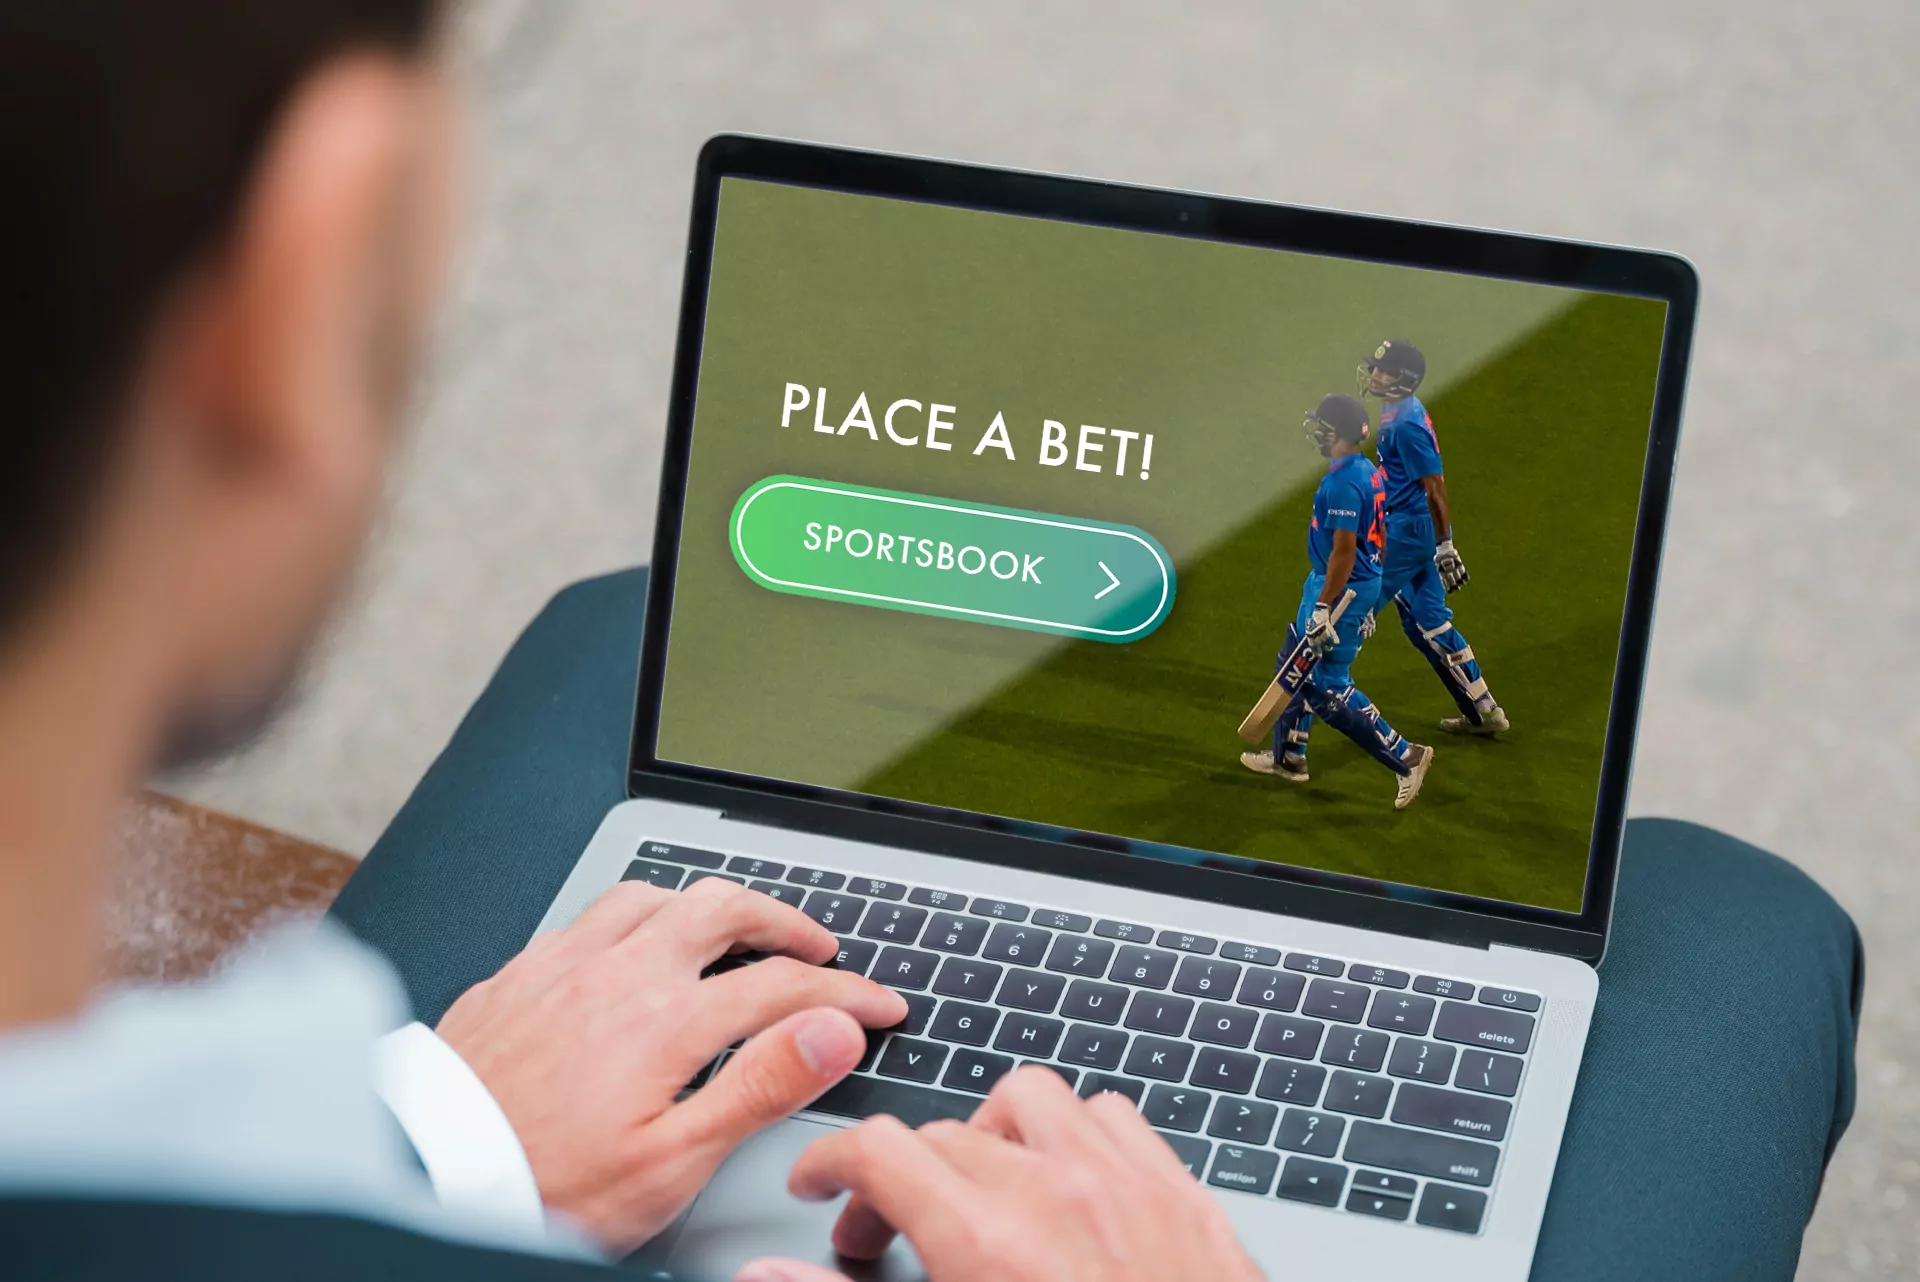 Go to the Sportsbook, choose a match and place a bet.